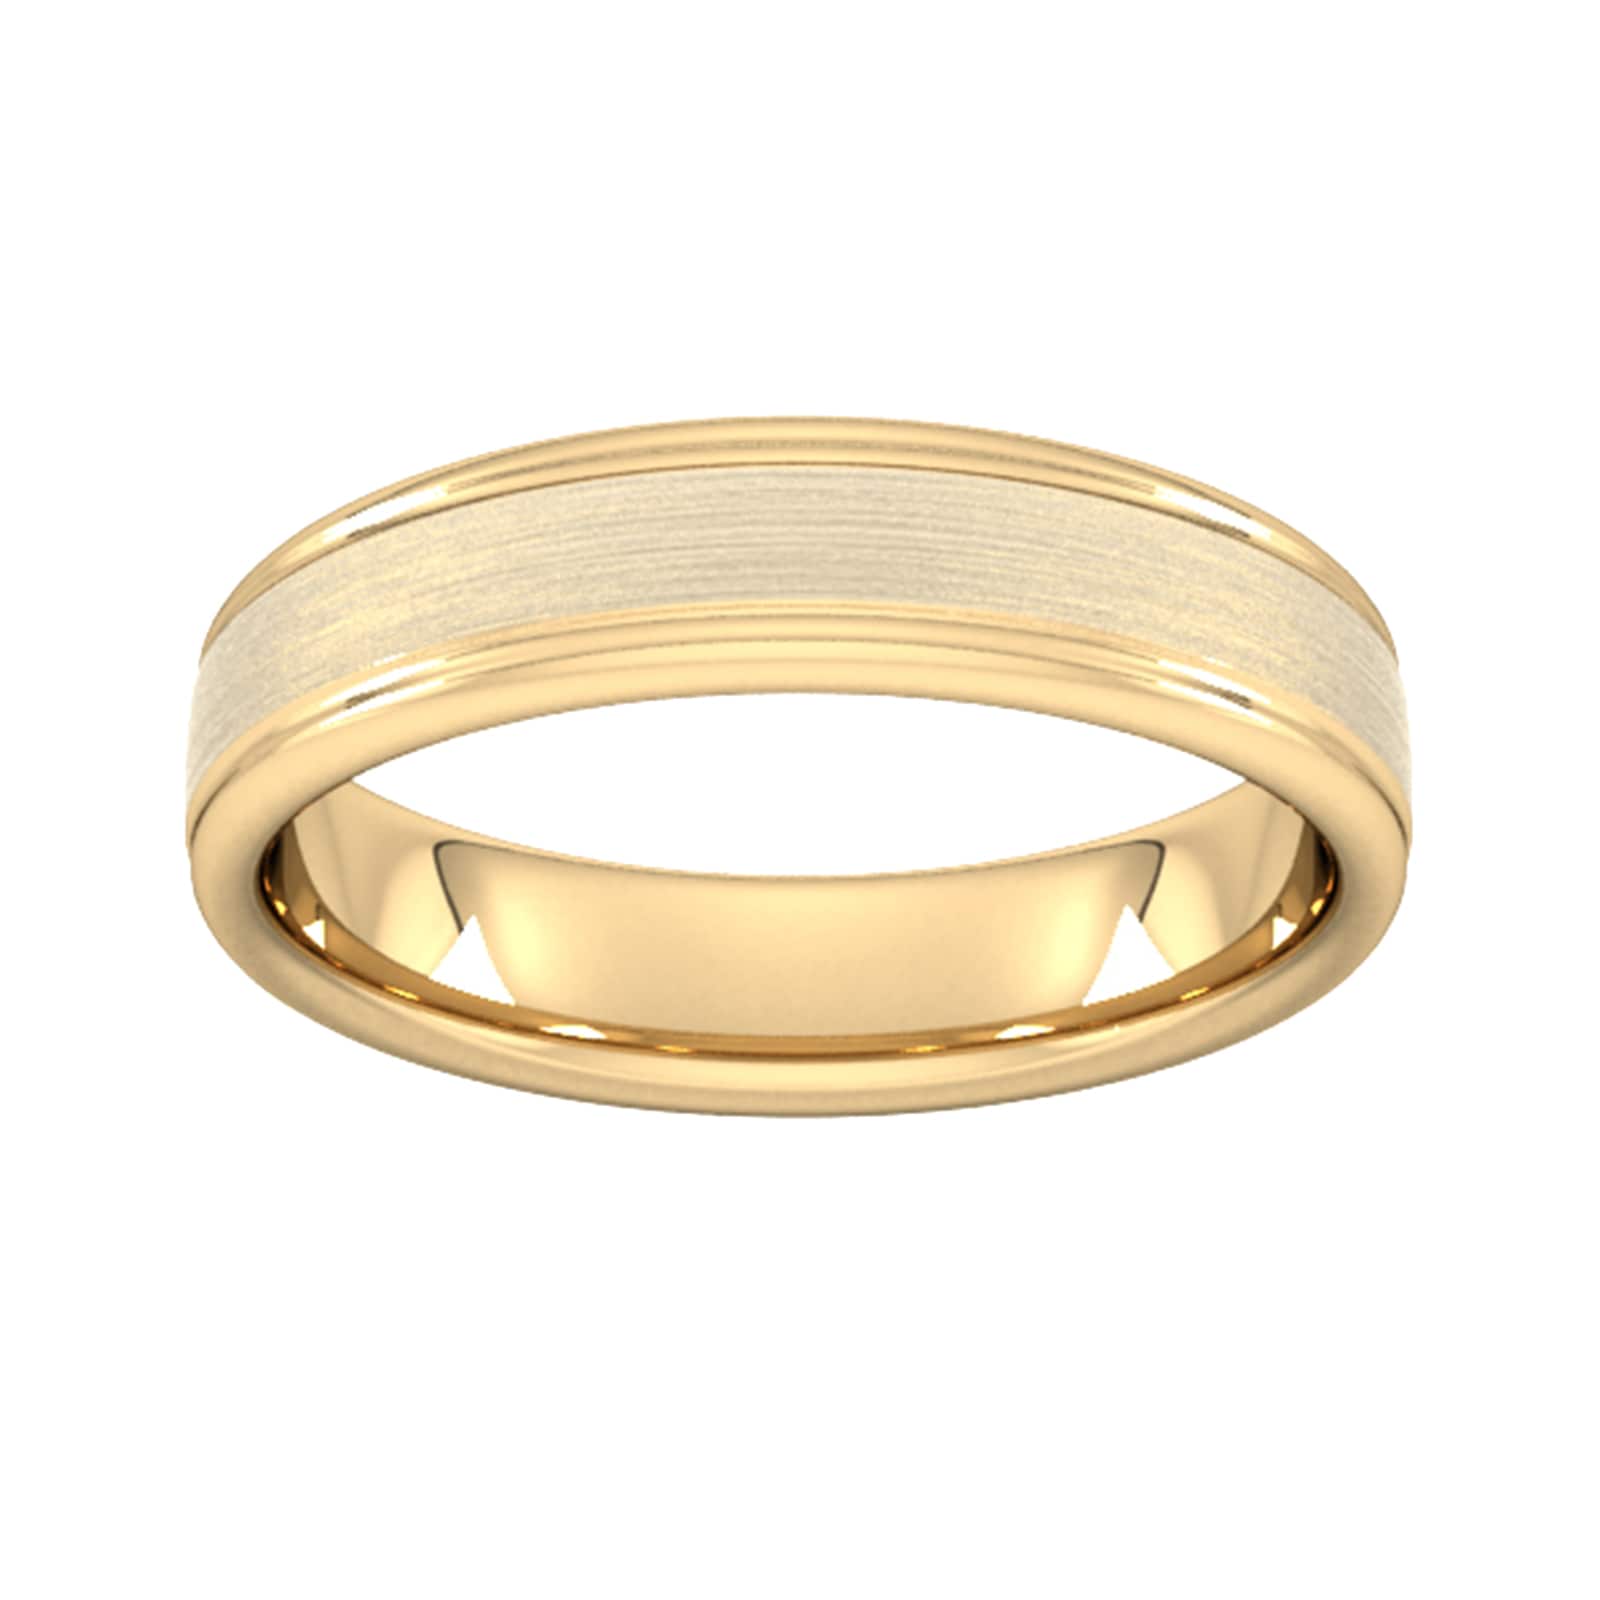 5mm Traditional Court Standard Matt Centre With Grooves Wedding Ring In 18 Carat Yellow Gold - Ring Size I